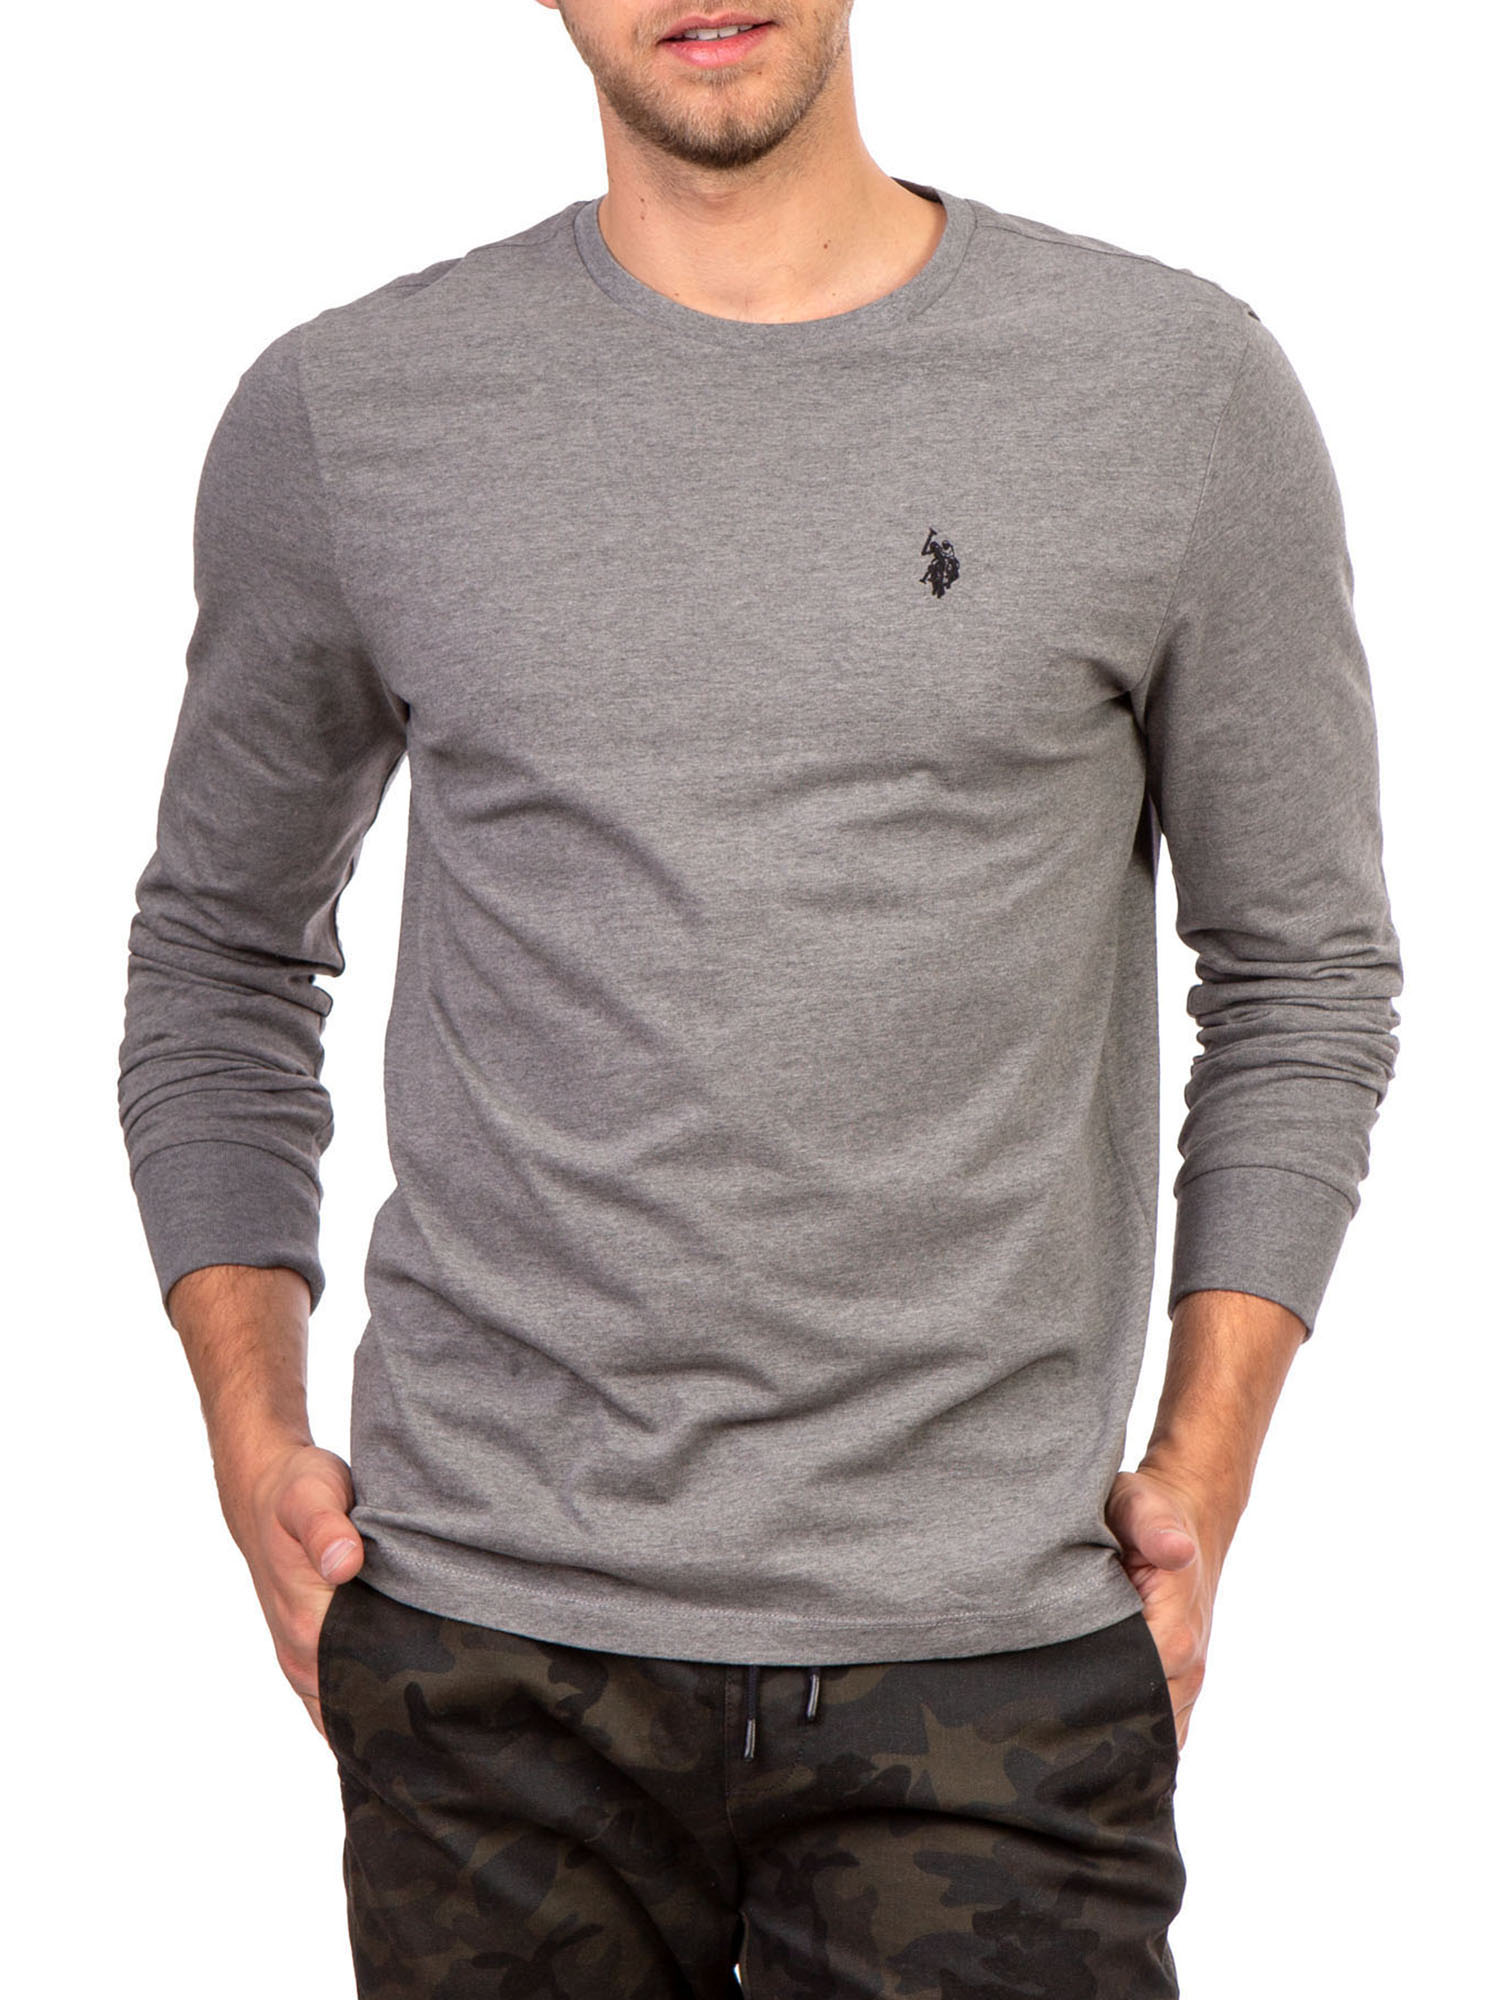 U.S. Polo Assn. Men's Long Sleeve Solid T-Shirt - image 1 of 4